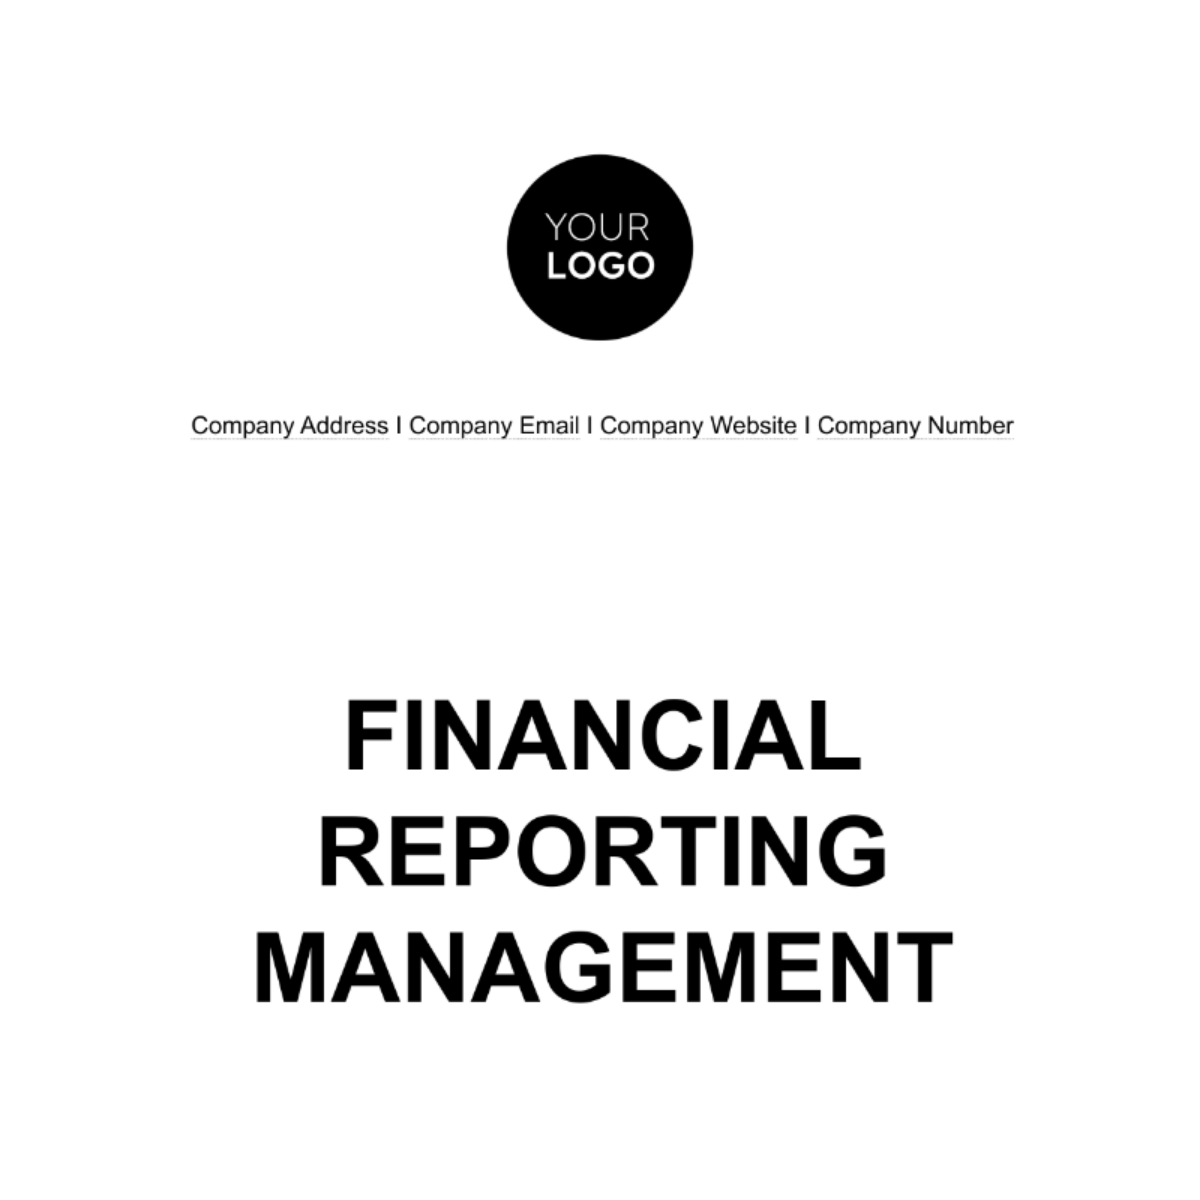 Financial Reporting Management Template